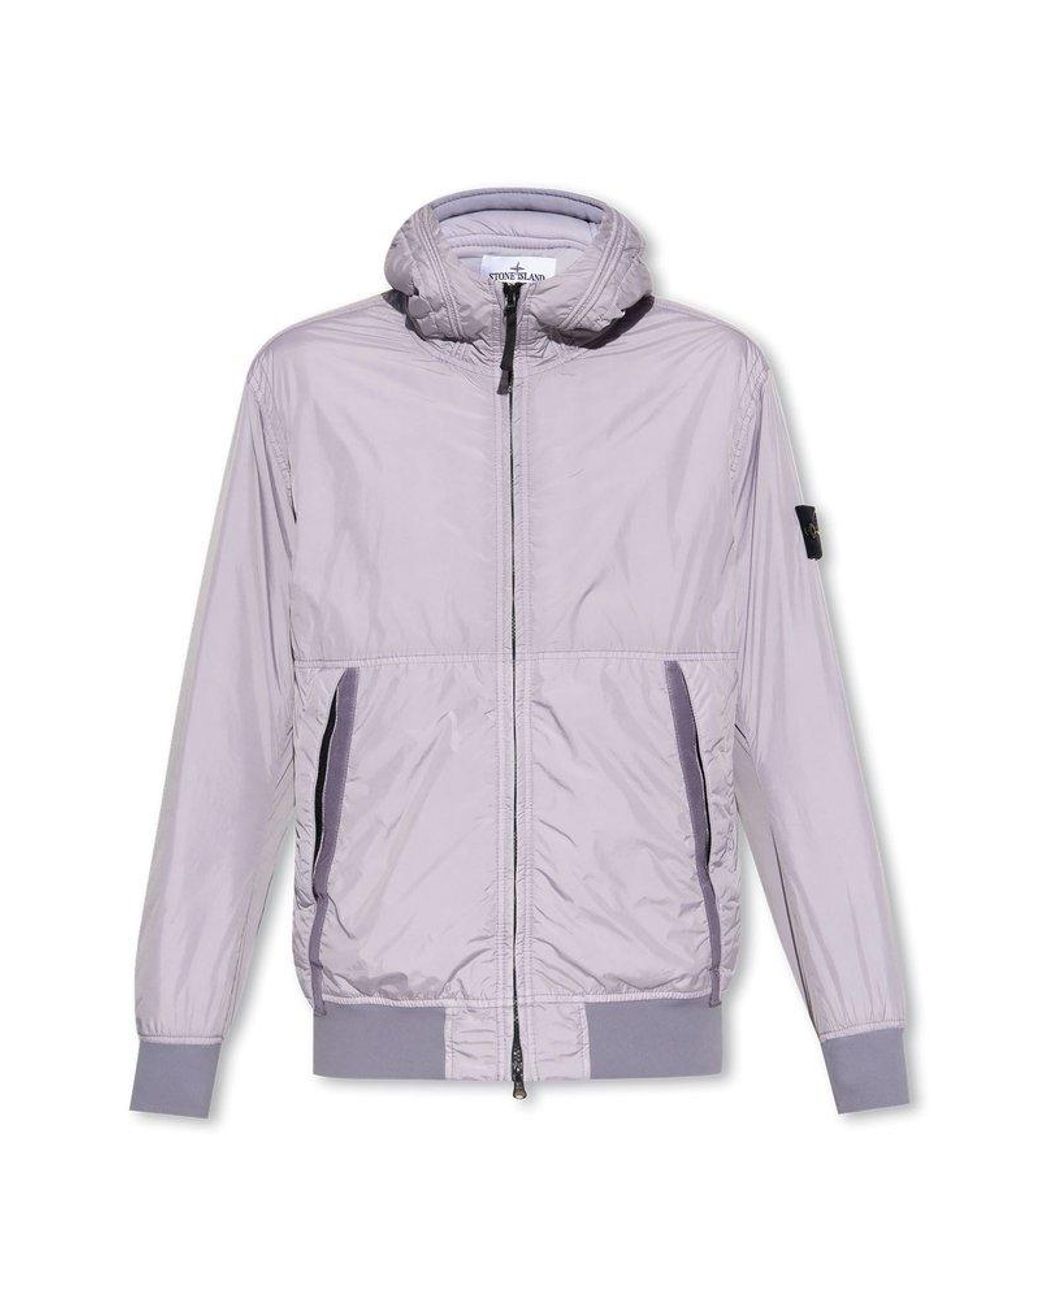 Stone Island Jacket With Logo in Purple for Men | Lyst